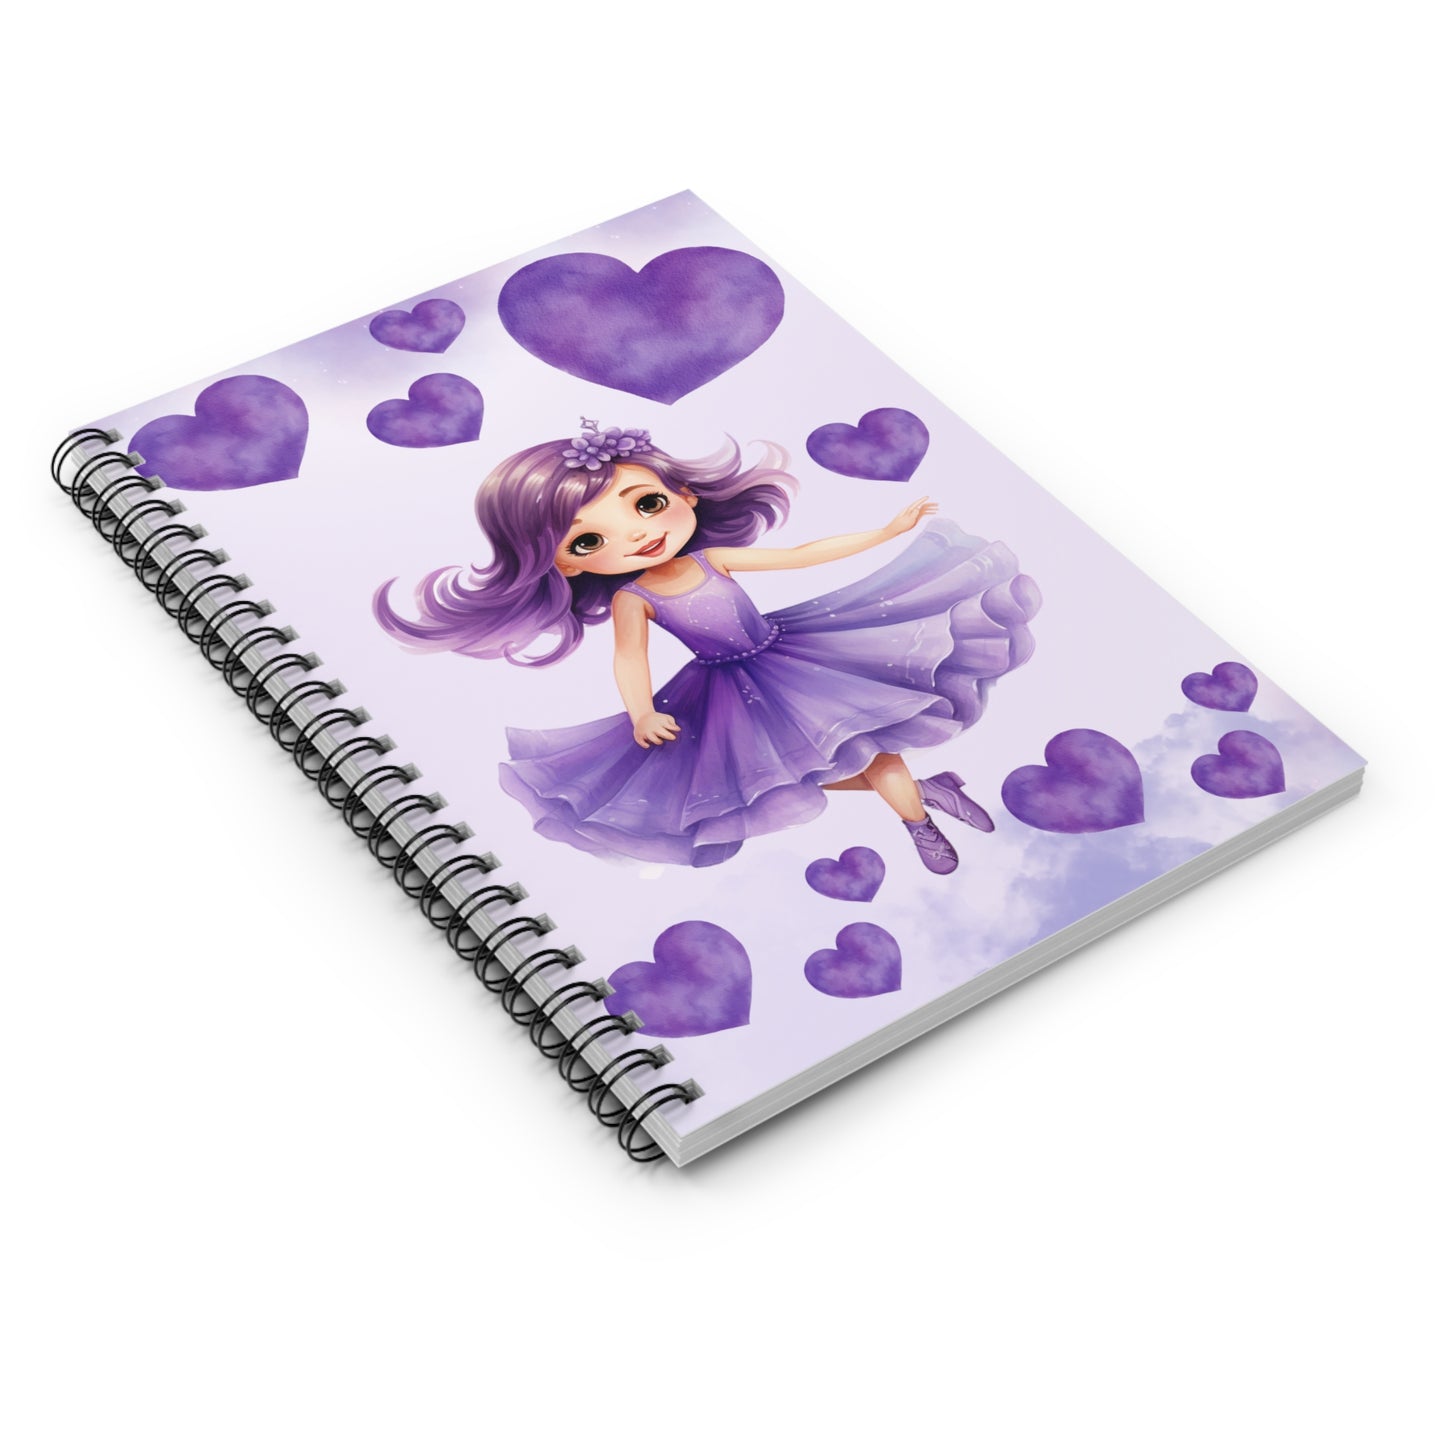 Purple Power: Spiral Notebook - Log Books - Journals - Diaries - and More Custom Printed by TheGlassyLass